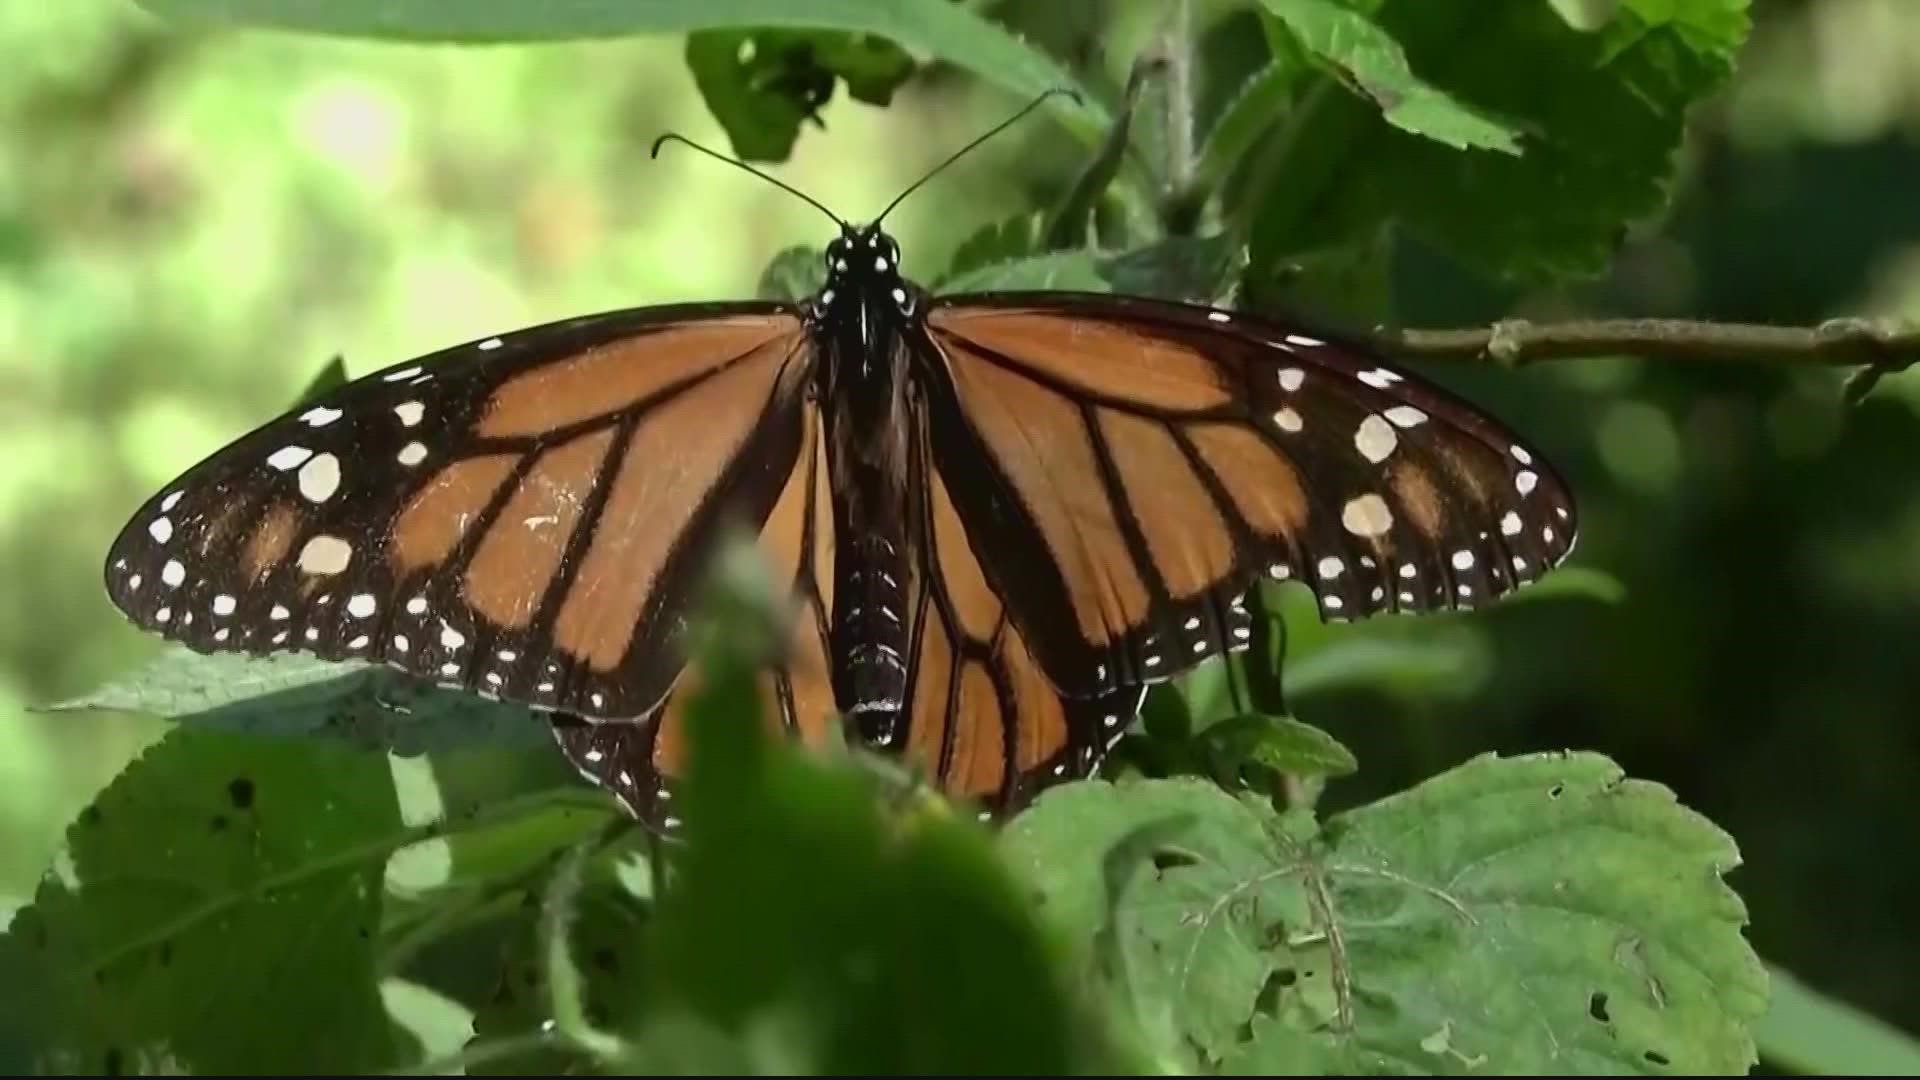 A growing number of garden enthusiasts in our region are taking action by planting patches of milkweed in an attempt to restore the butterflies' habitat.